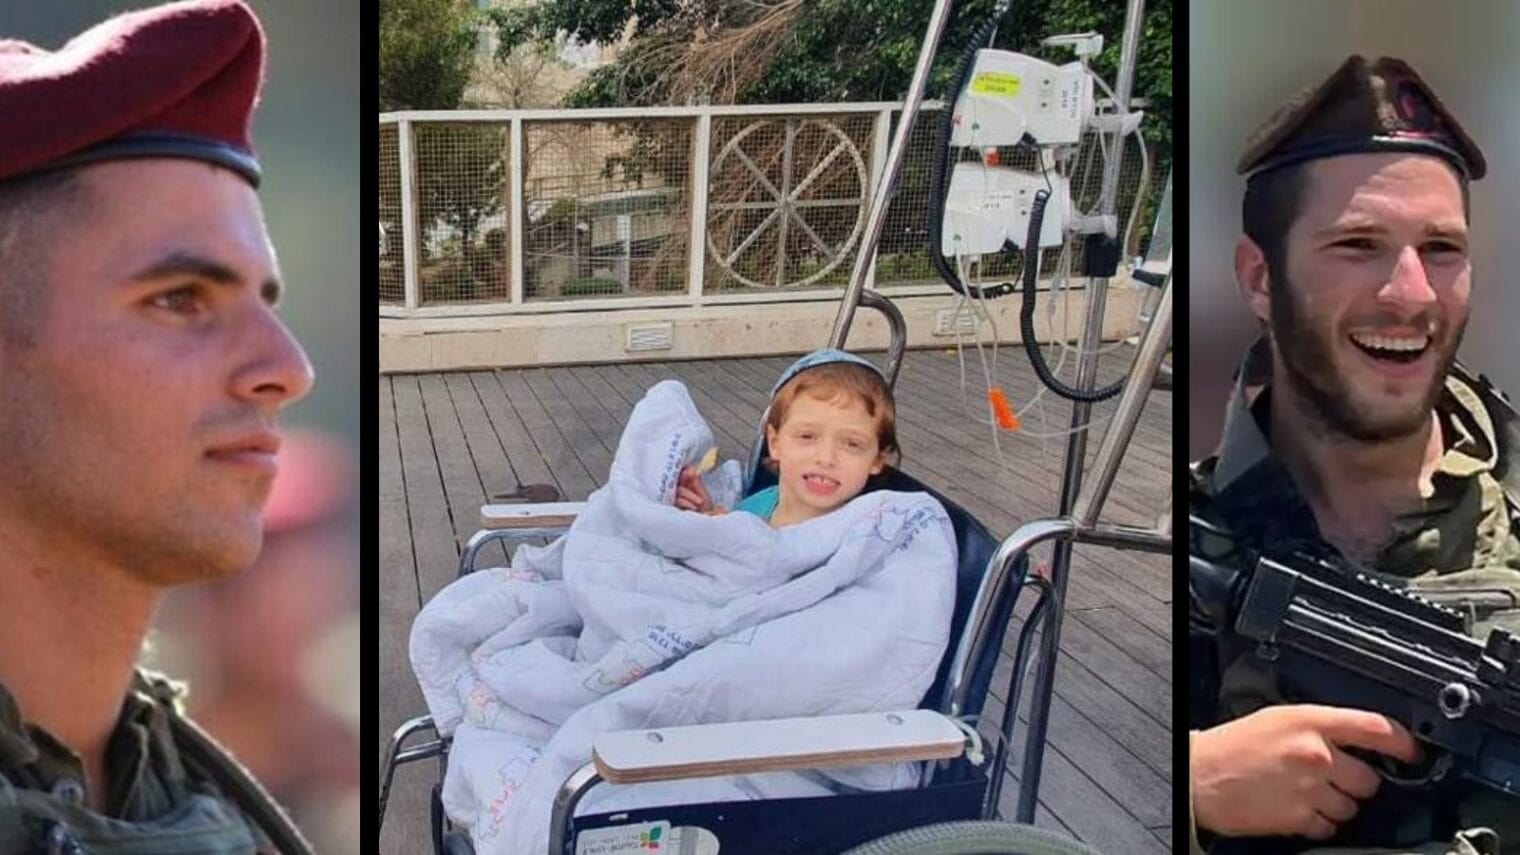 This eight-year-old boy received part of the liver of fallen soldier Amichai Rubin, right. Photo of child courtesy of Schneider Childrenâ€™s Hospital; photos of soldiers courtesy of their families